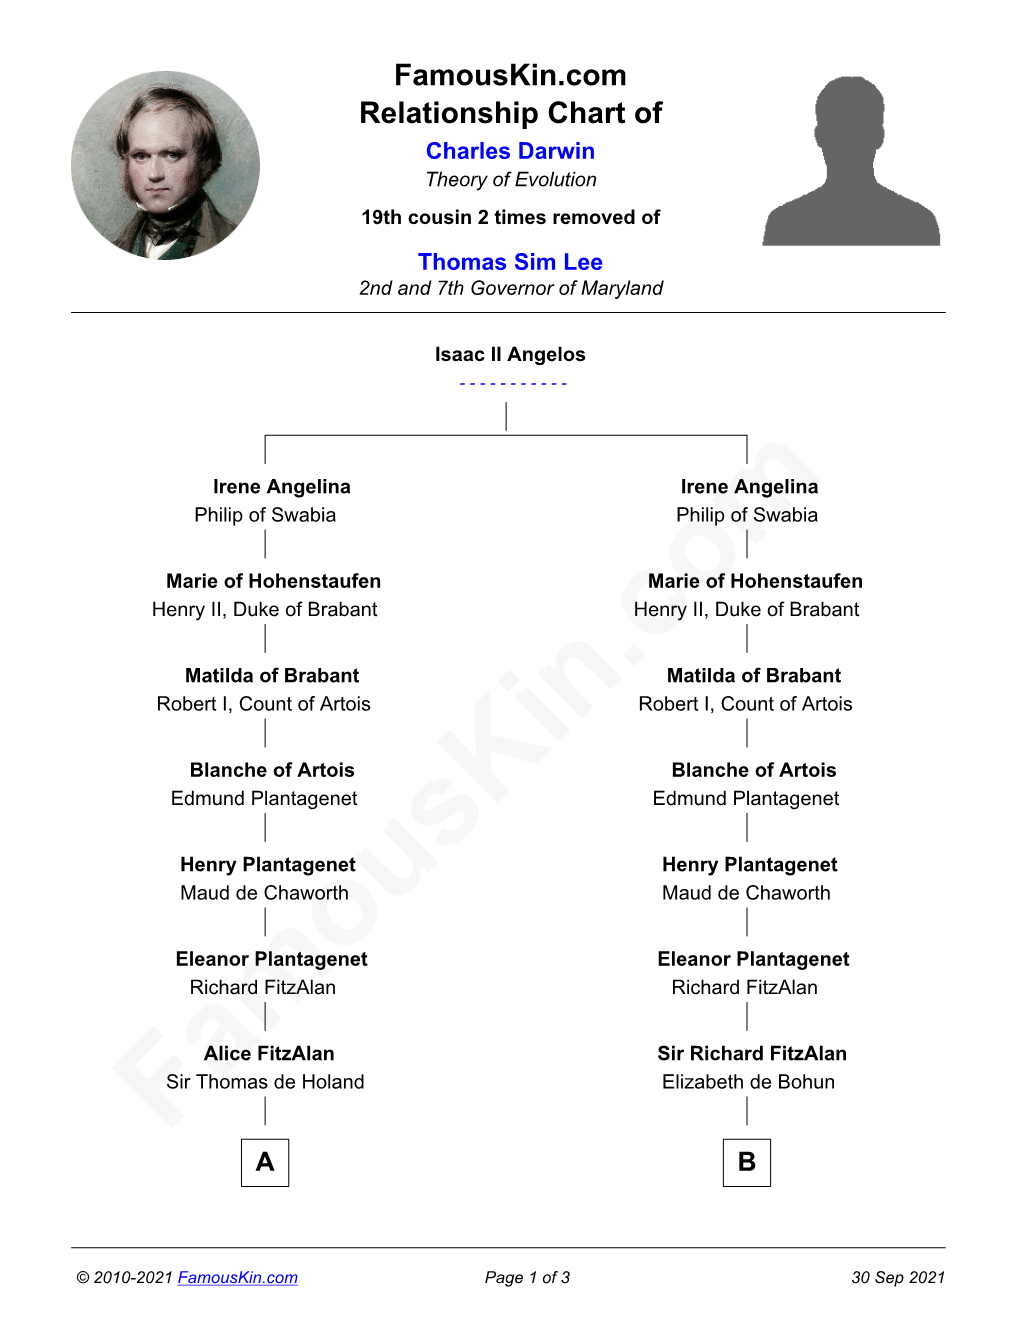 Famouskin.Com Relationship Chart of Charles Darwin Theory of Evolution 19Th Cousin 2 Times Removed of Thomas Sim Lee 2Nd and 7Th Governor of Maryland